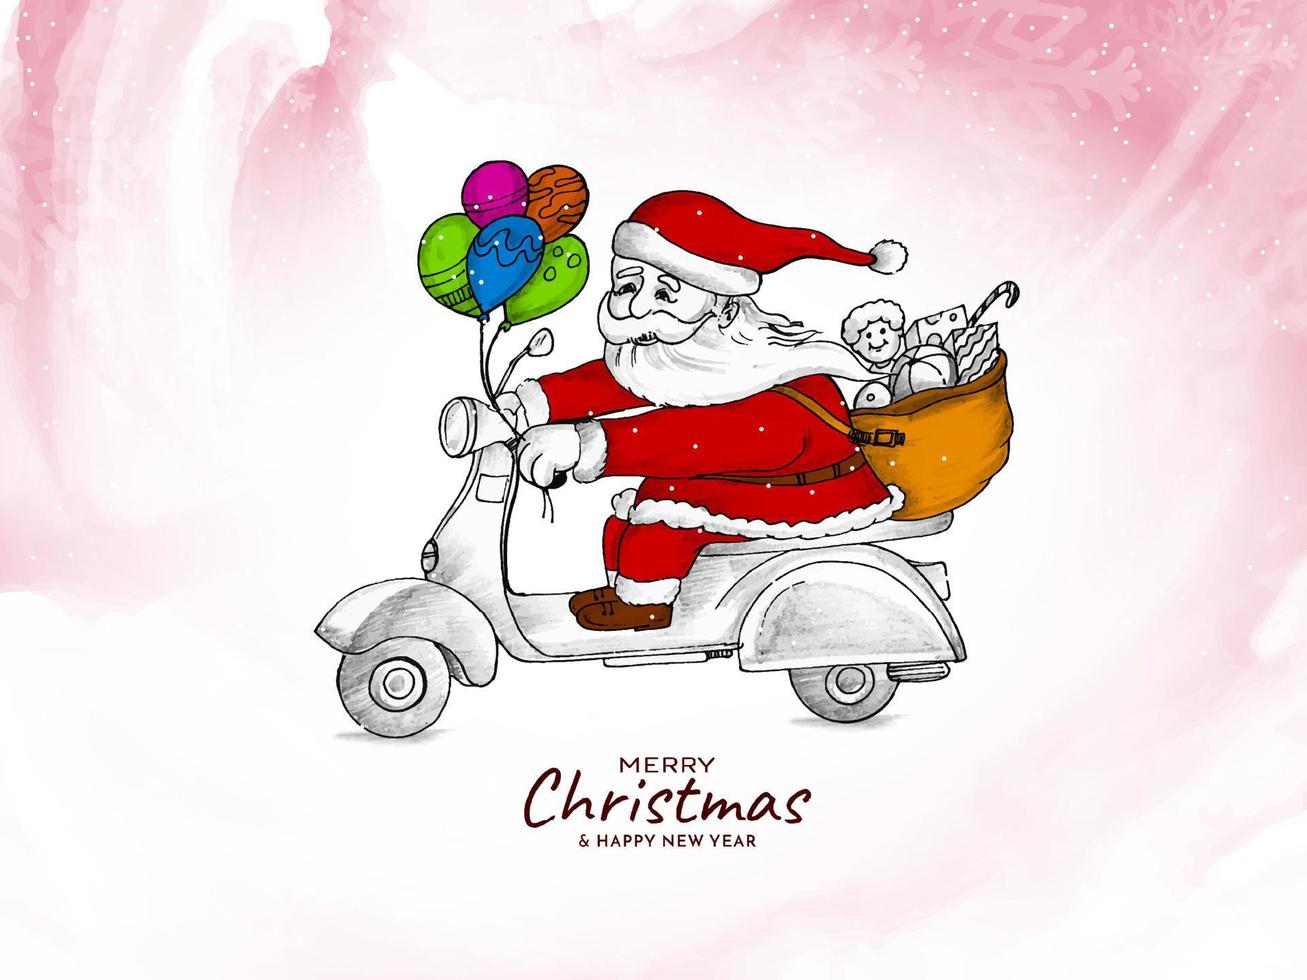 Merry Christmas festival background with santa claus on scooter vector